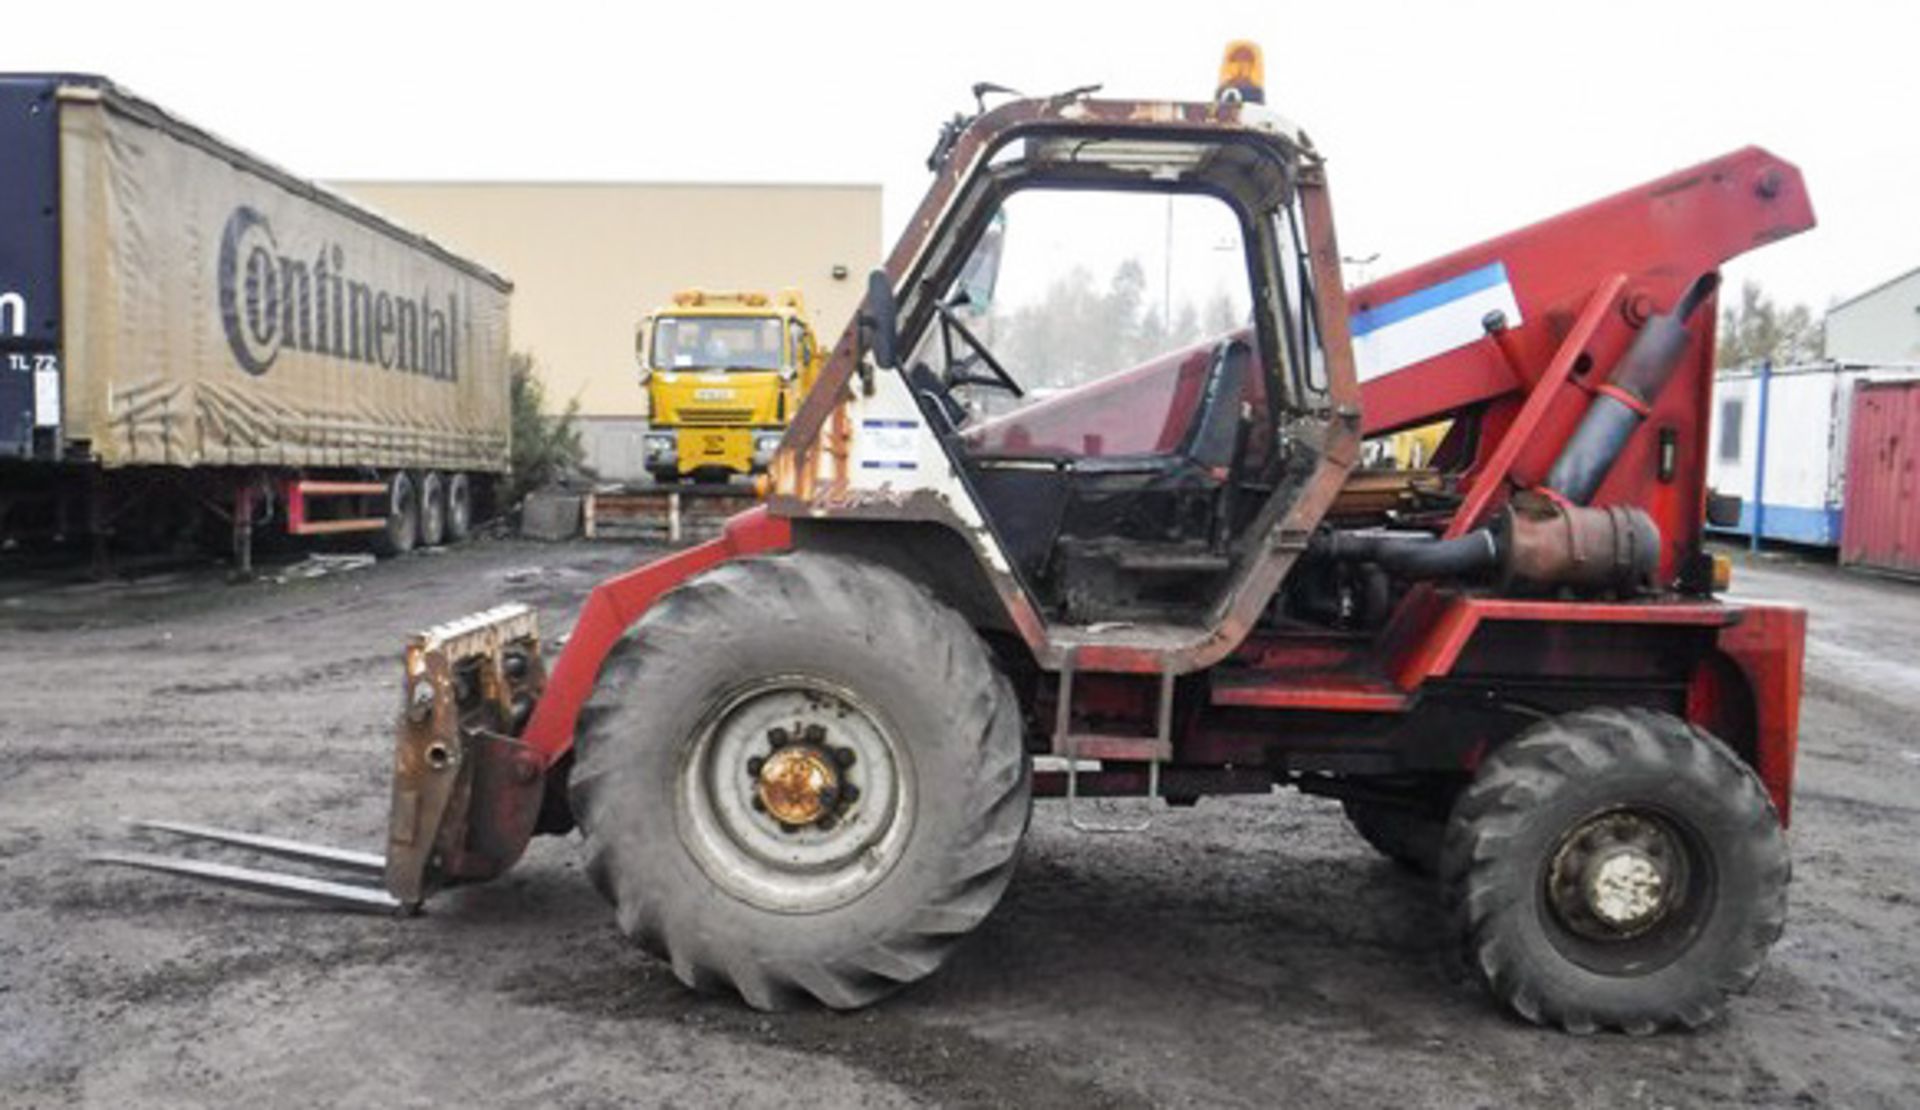 1989 MANITOU TURBO, MODEL - MT425CPT, SERIES 2, CHASSIS 185836, 5693HRS (NOT VERIFIED) ** 10% BUYERS - Image 14 of 15